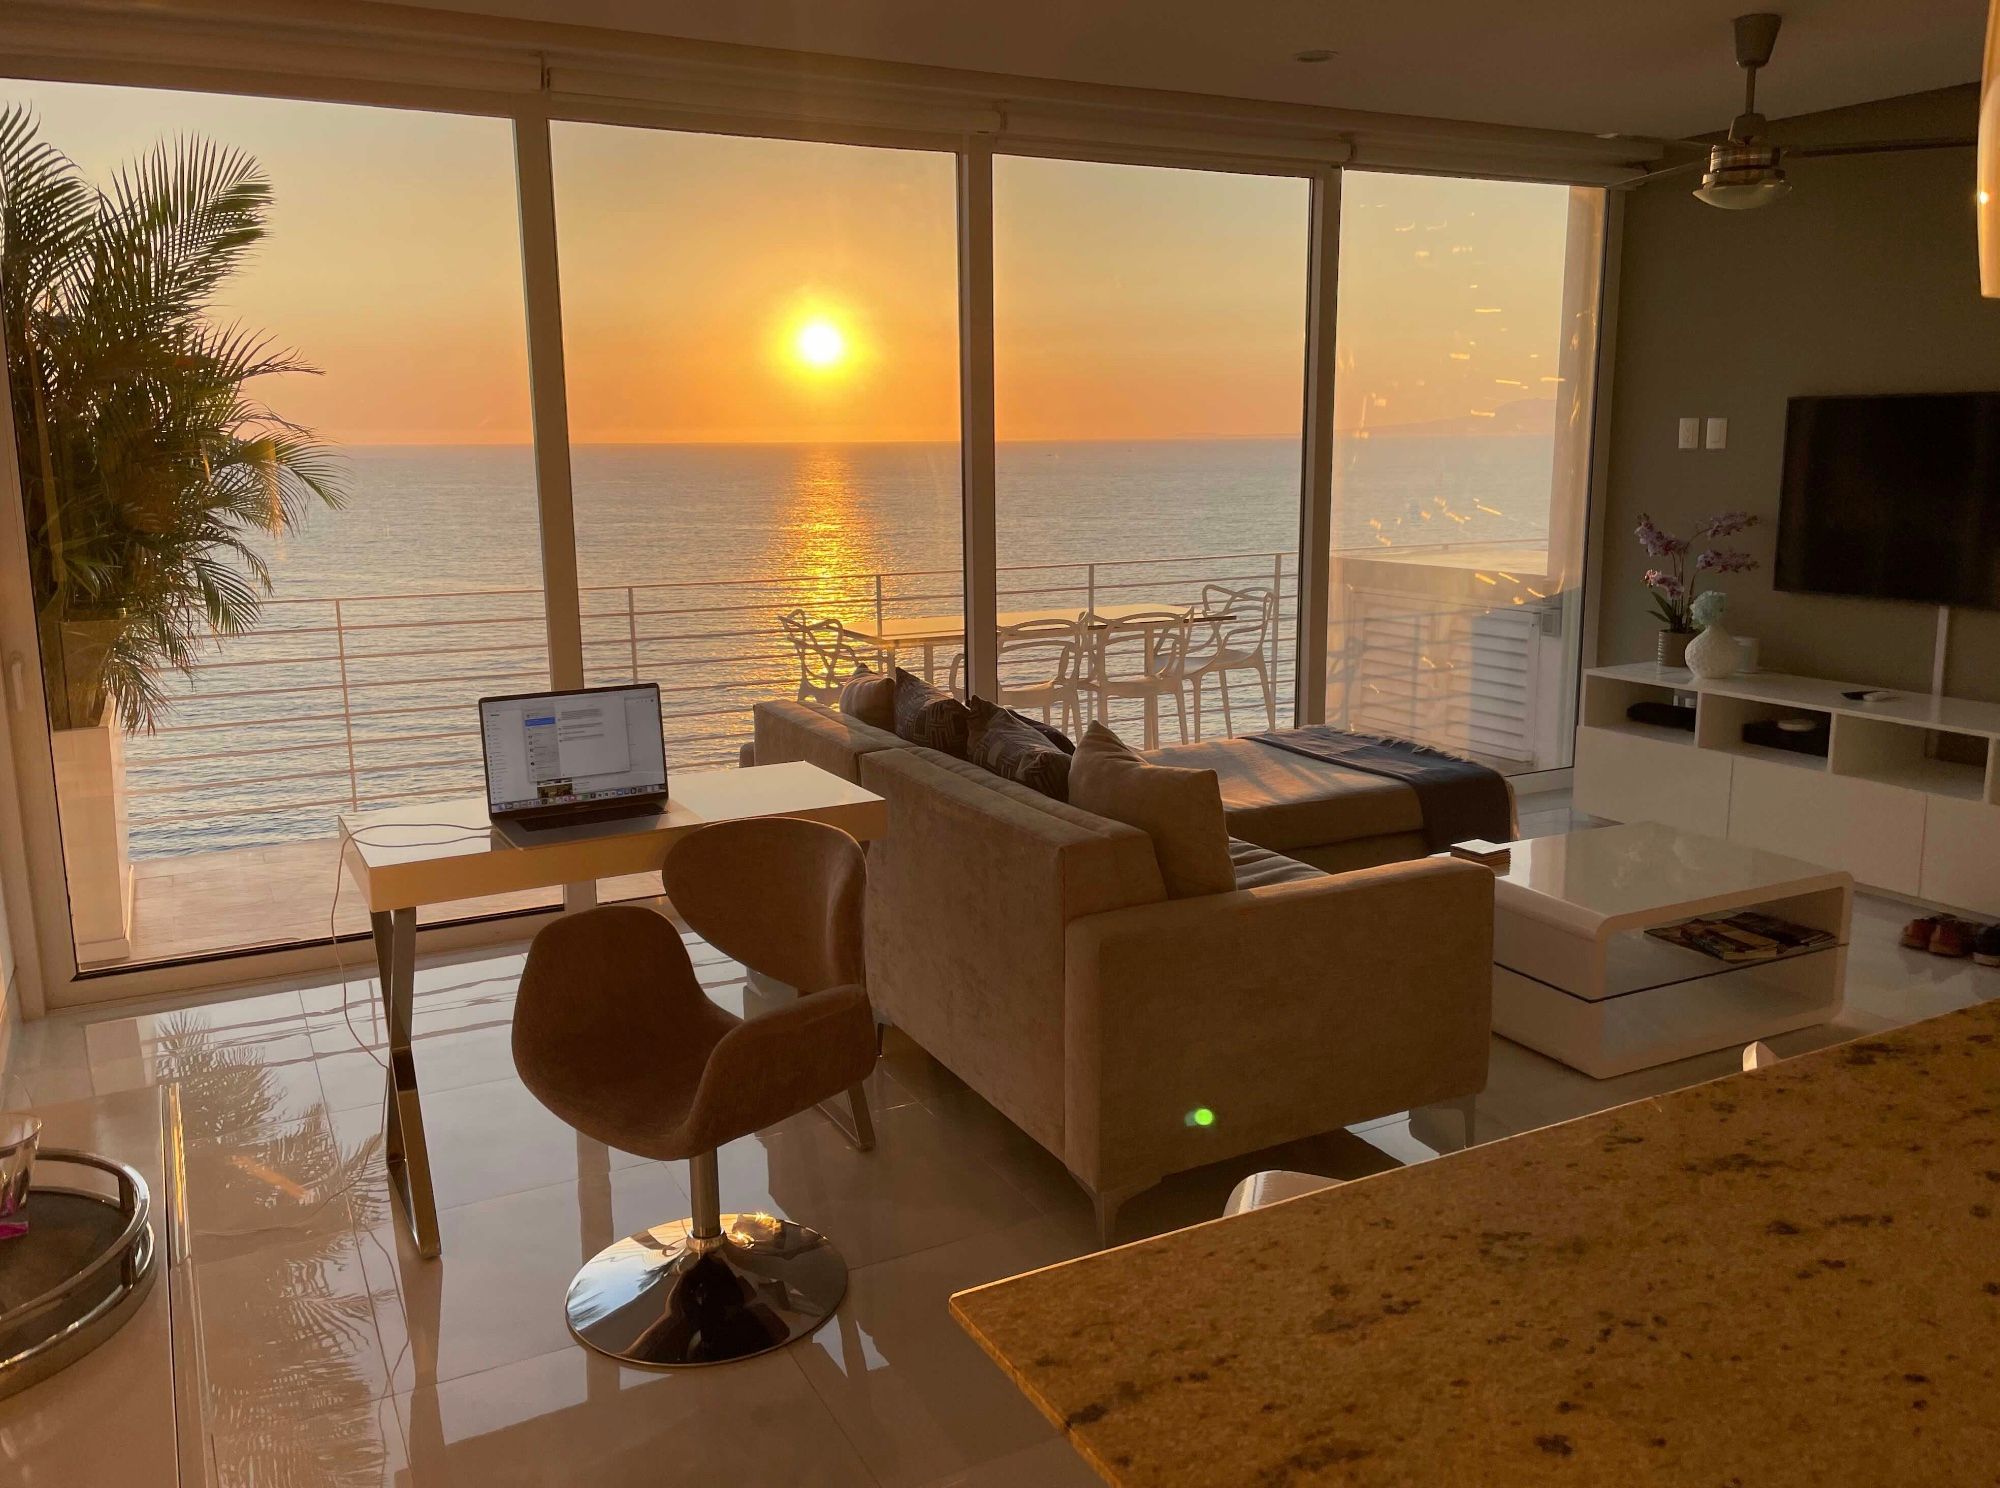 Photo shows a laptop set on a desk in front of a wall of windows, with a gorgeous sunset over the ocean in the distance. End description.